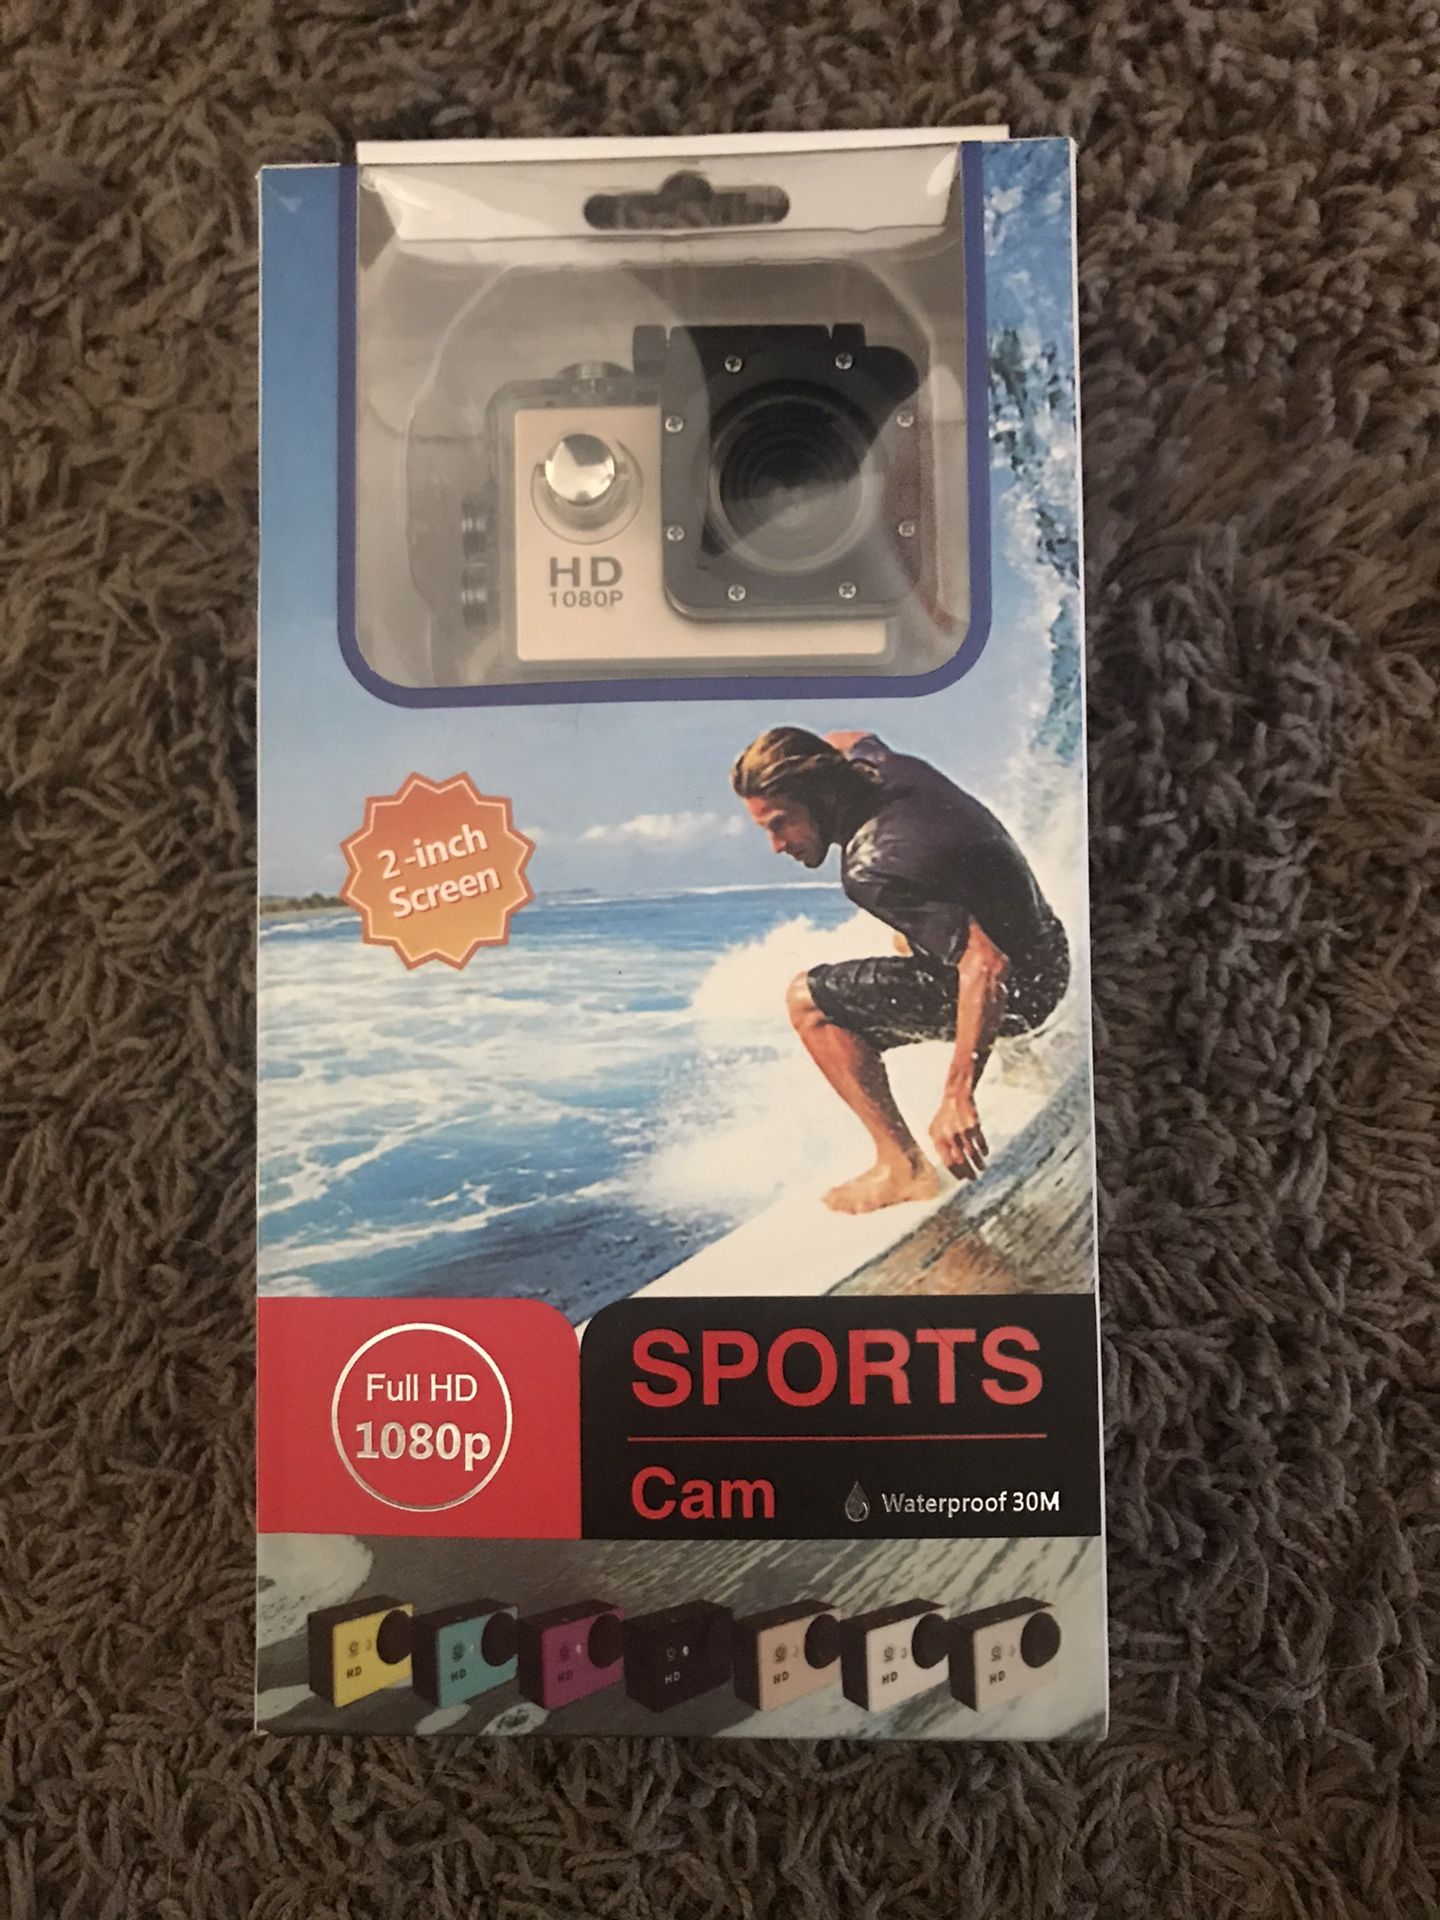 Full HD 1080p Waterproof Sports Cam. Never used.